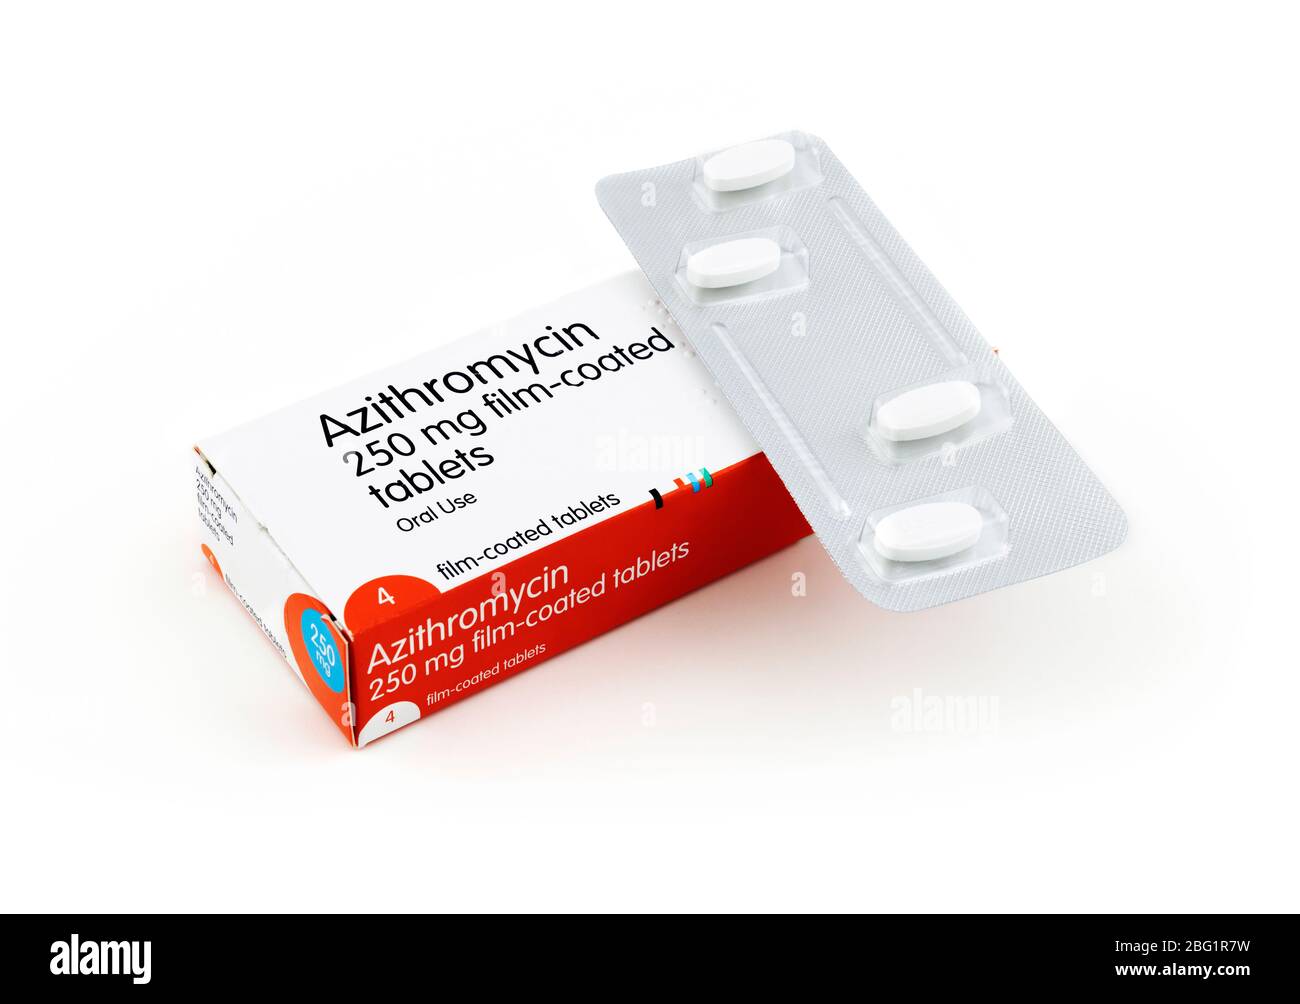 Azithromycin tablets  Azithromycin 250mg tablets COVID 19 possible treatment Stock Photo